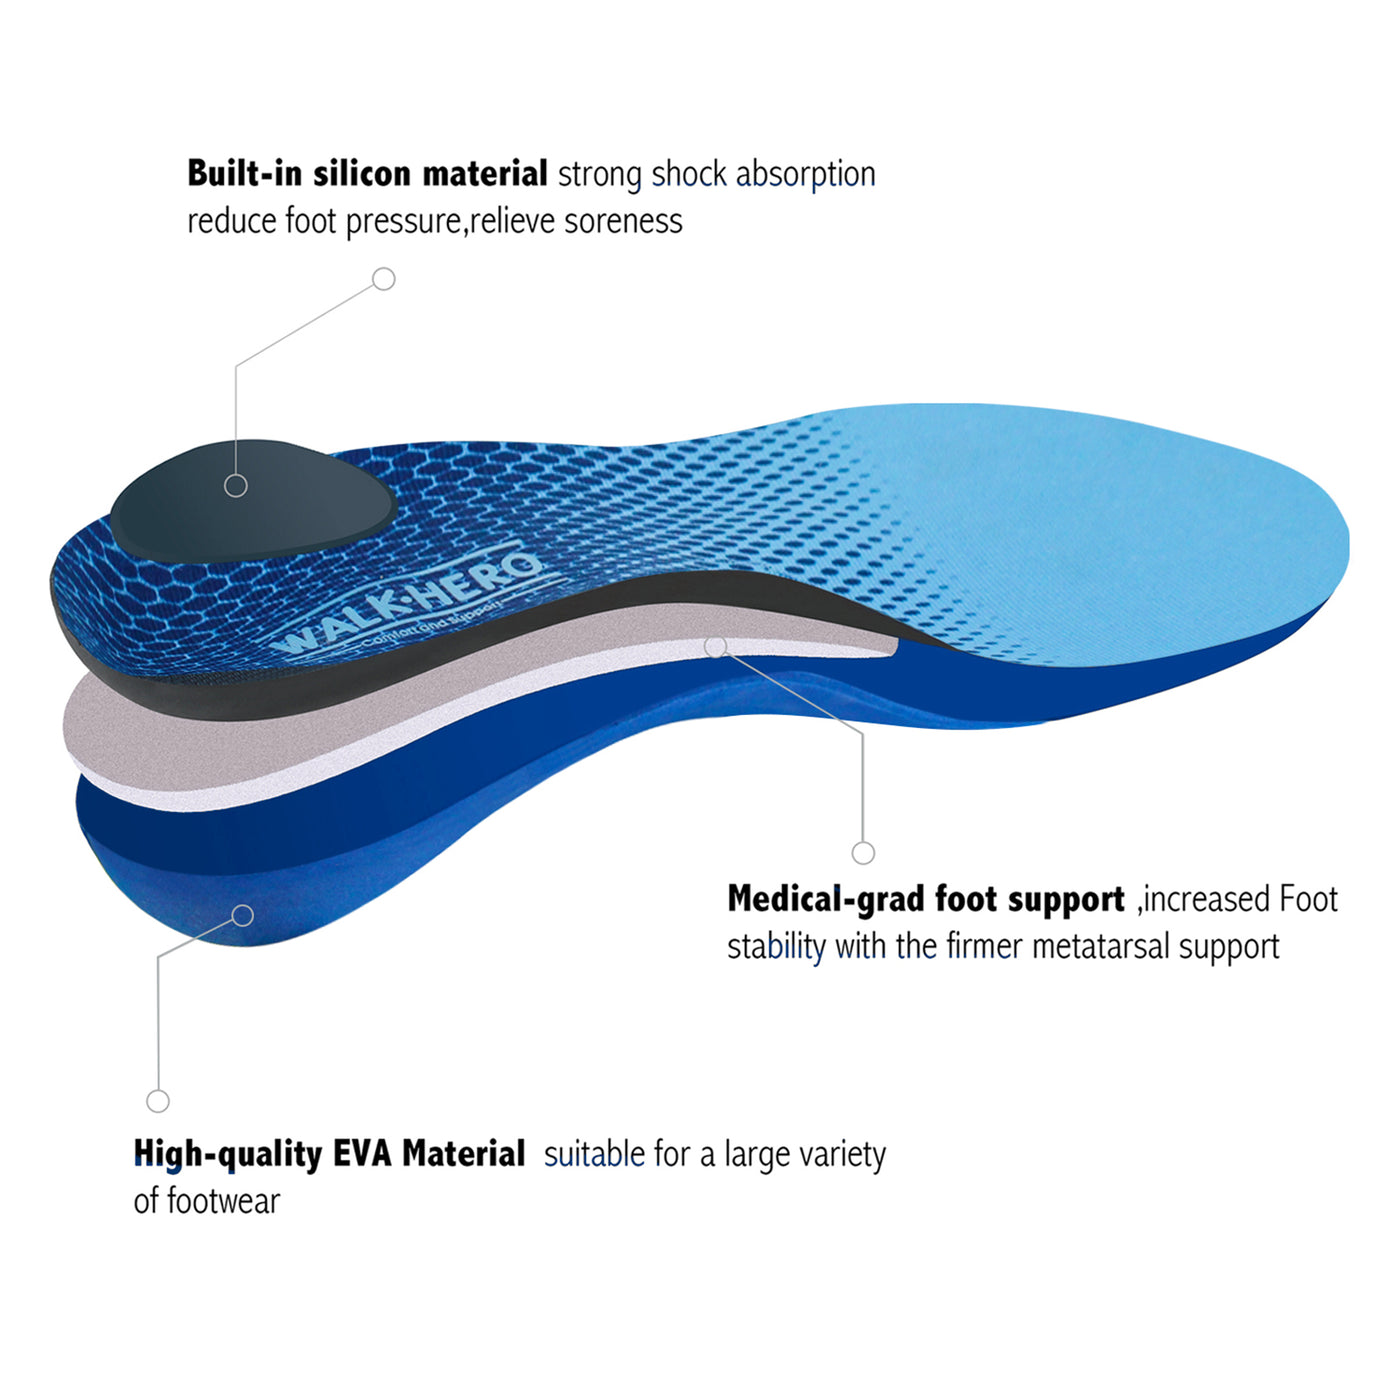 WALKHERO Women's Arch Support Orthotic Insoles New Blue